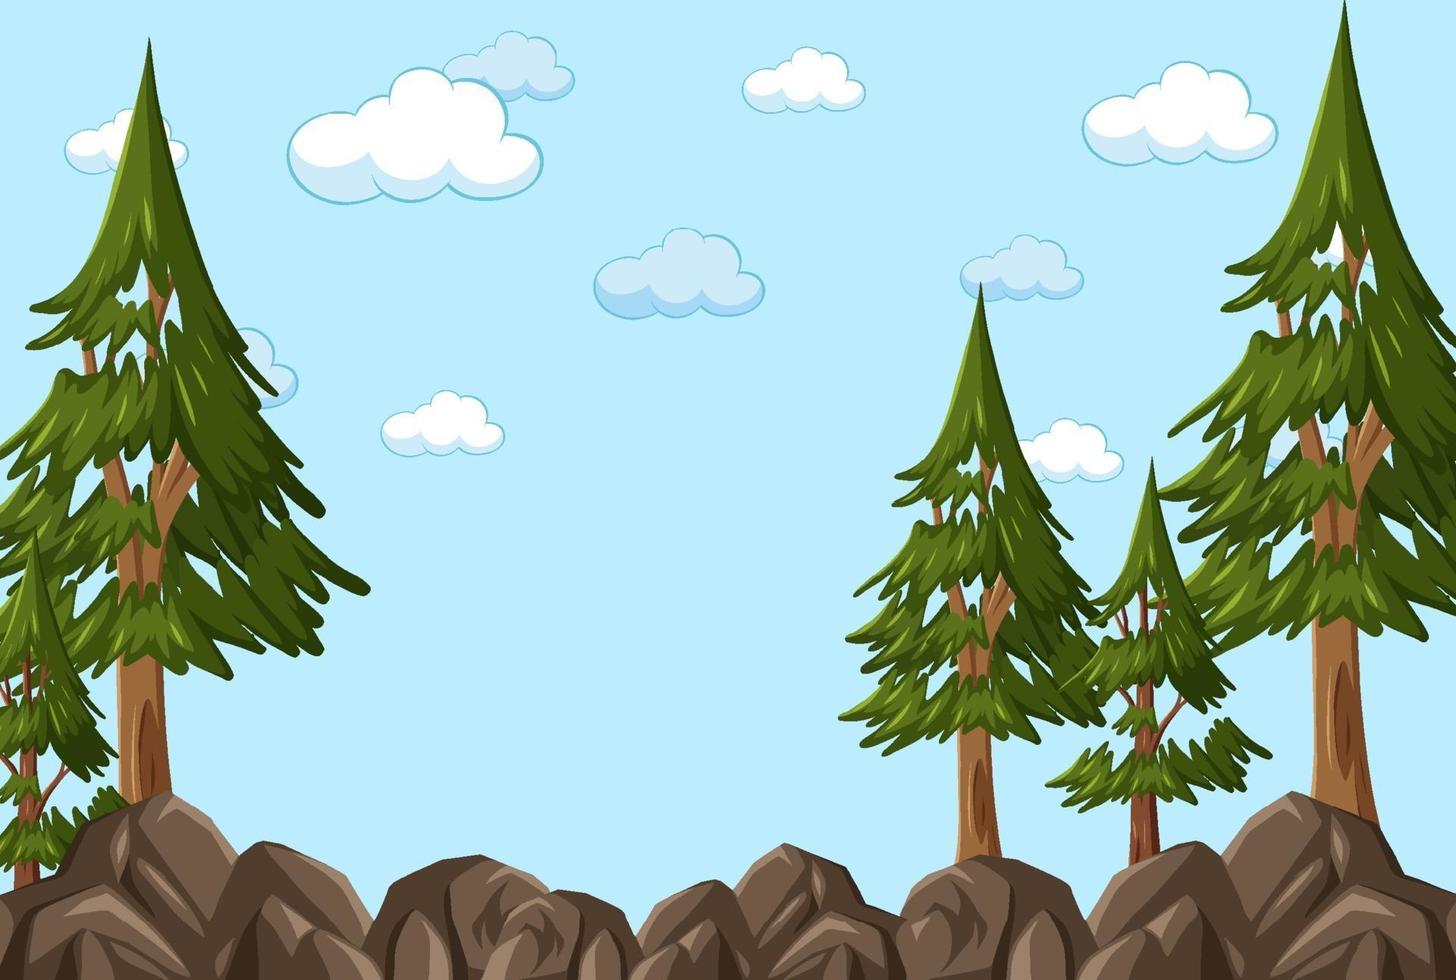 Empty sky background with many pine trees vector